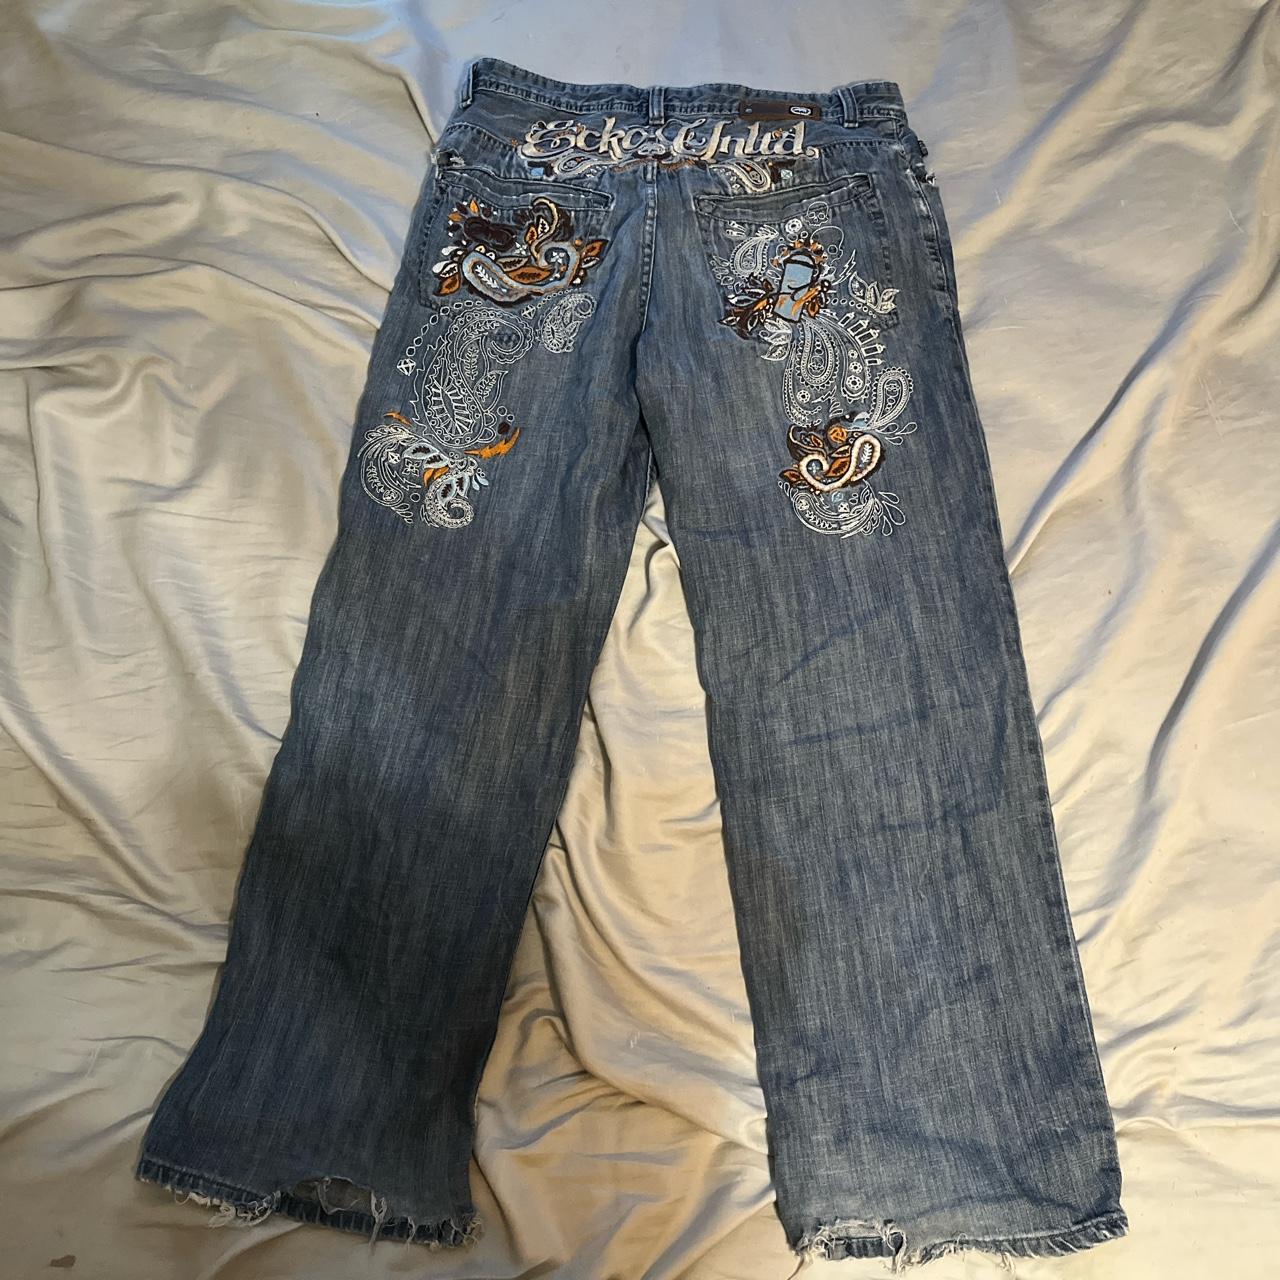 Baggy fit size 36 jeans!!! The fit so well and go... - Depop